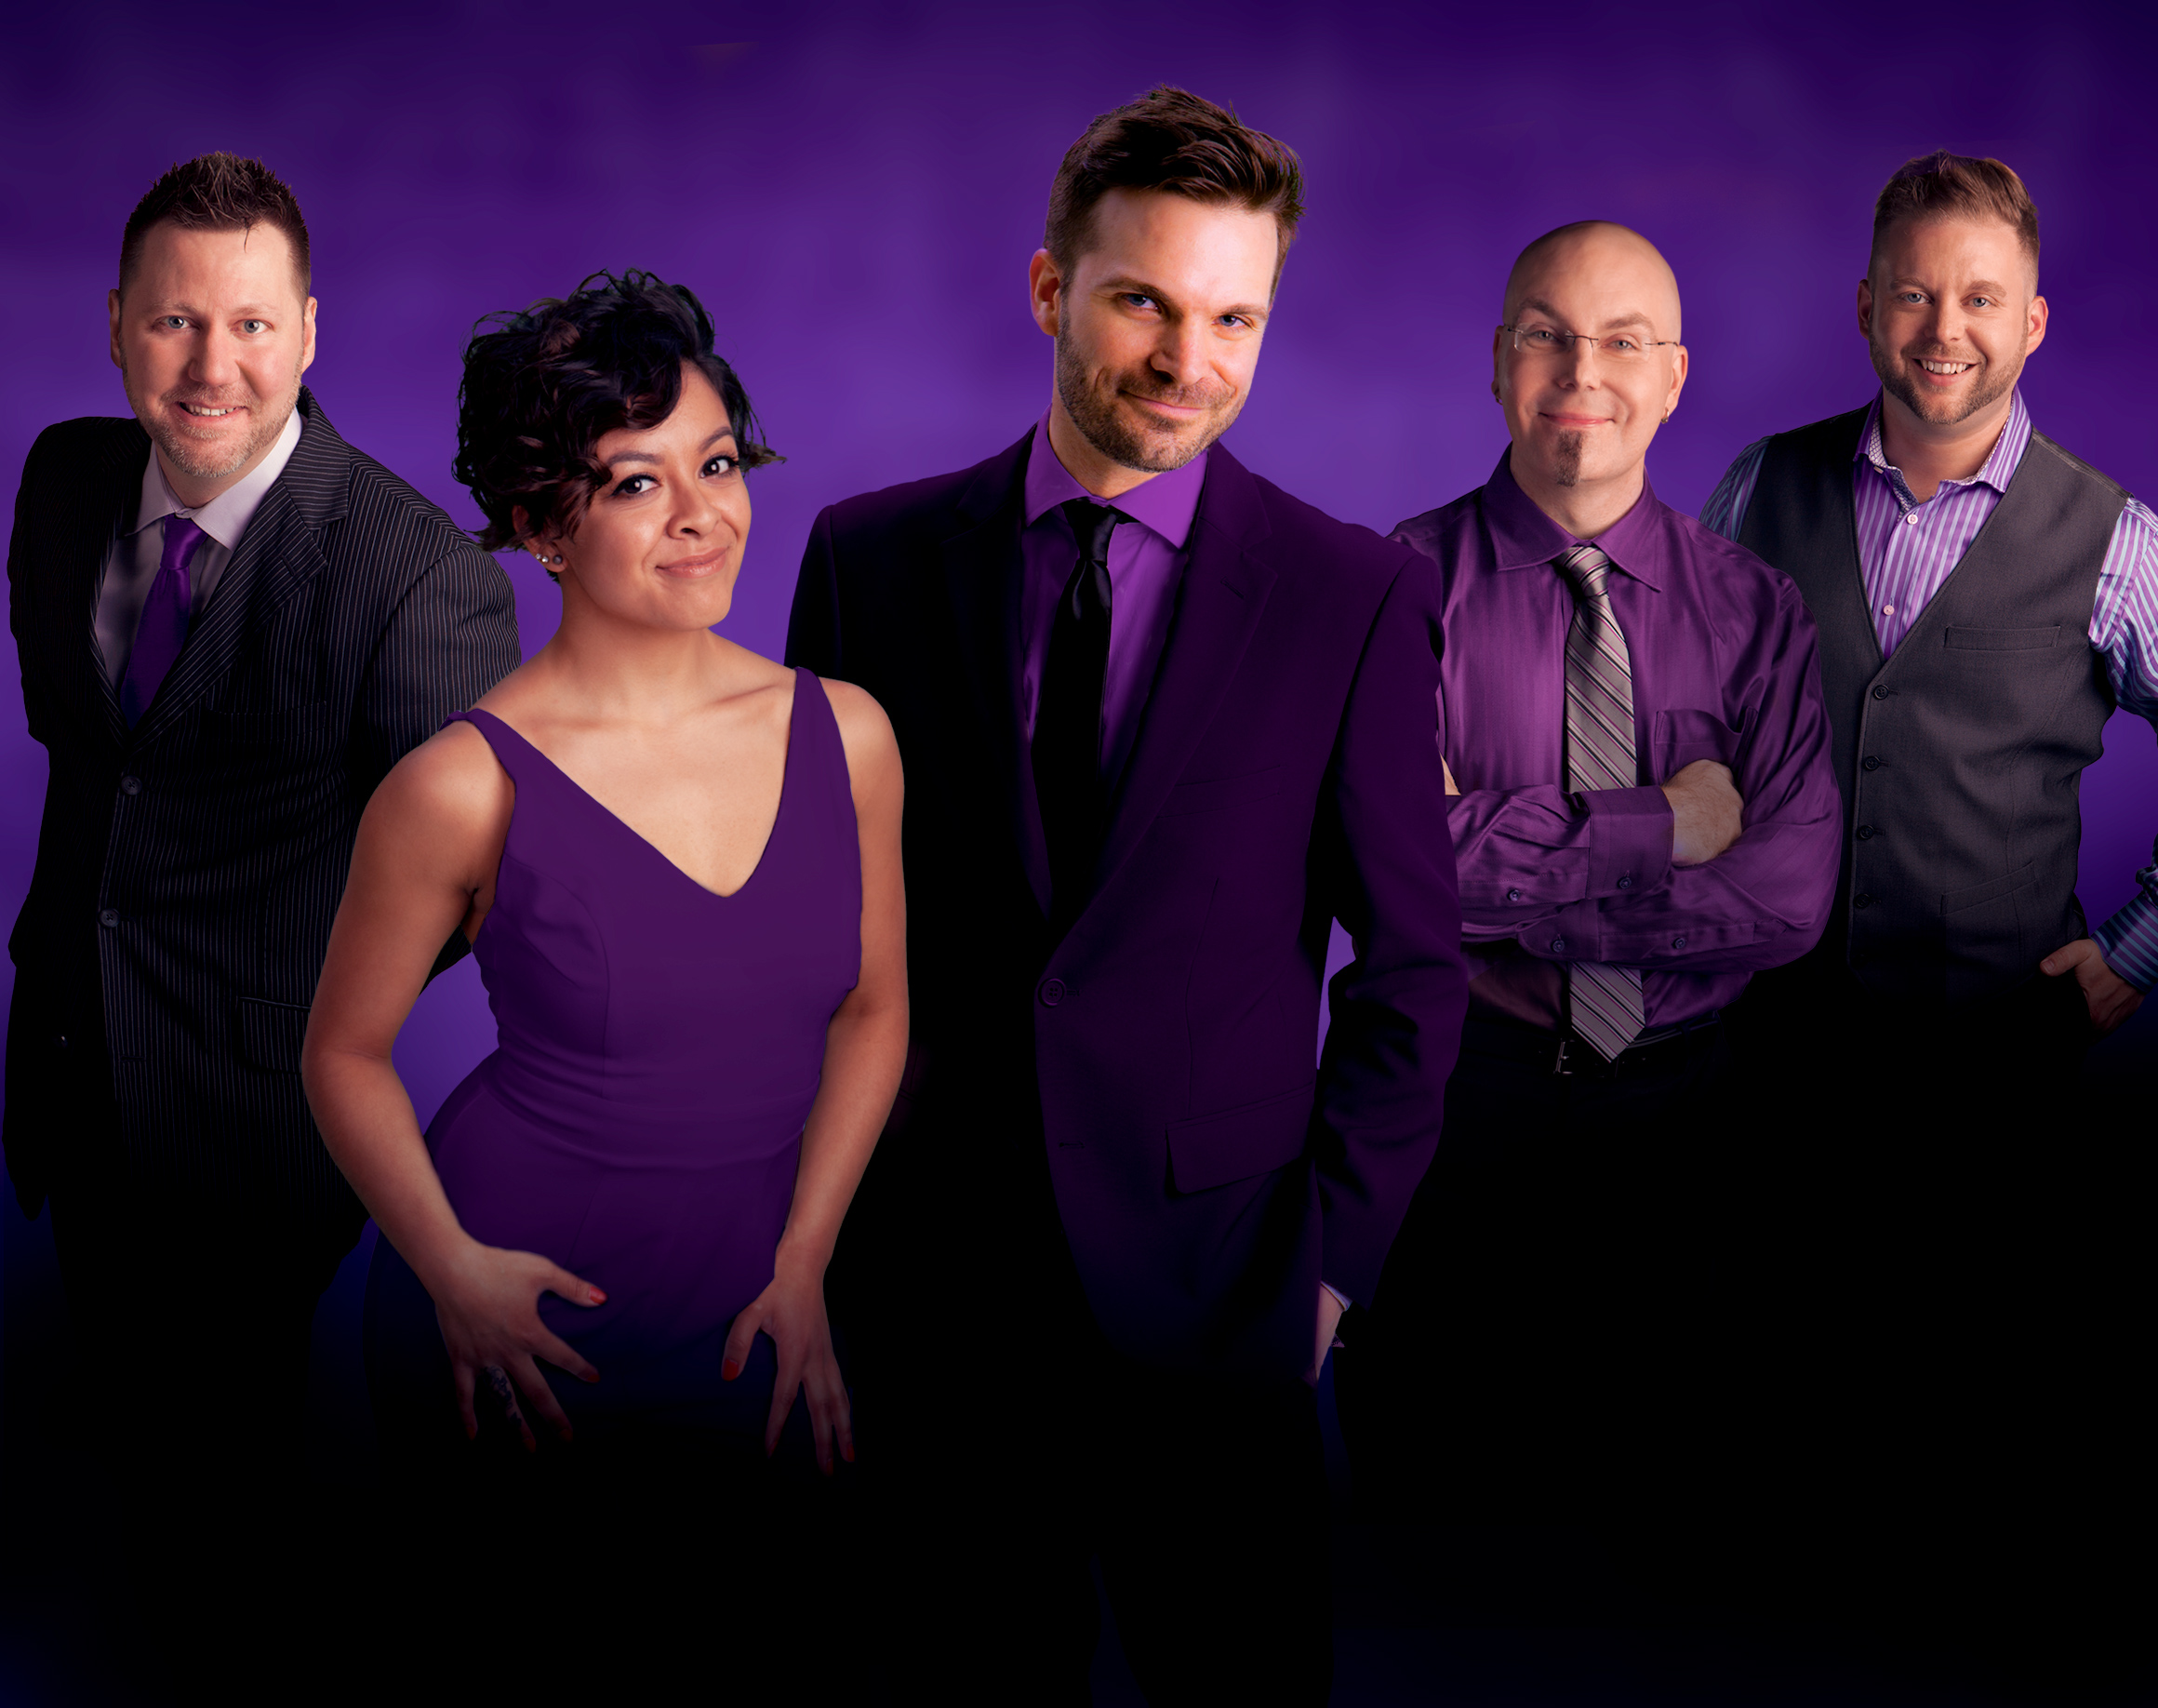 All 5 members of Shout Out are posing in front of a purple background.